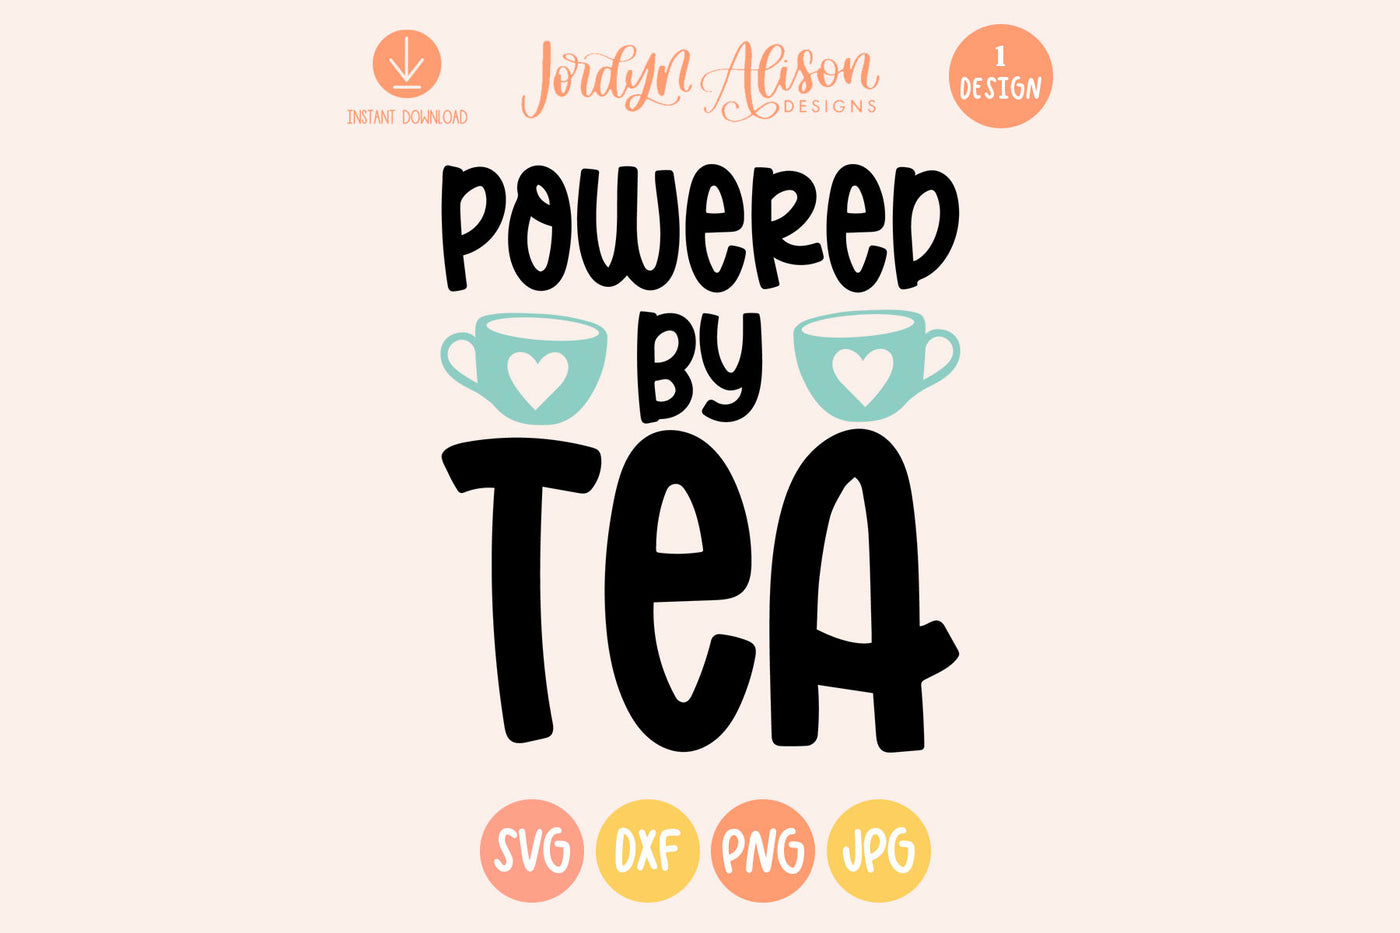 Powered by Tea SVG